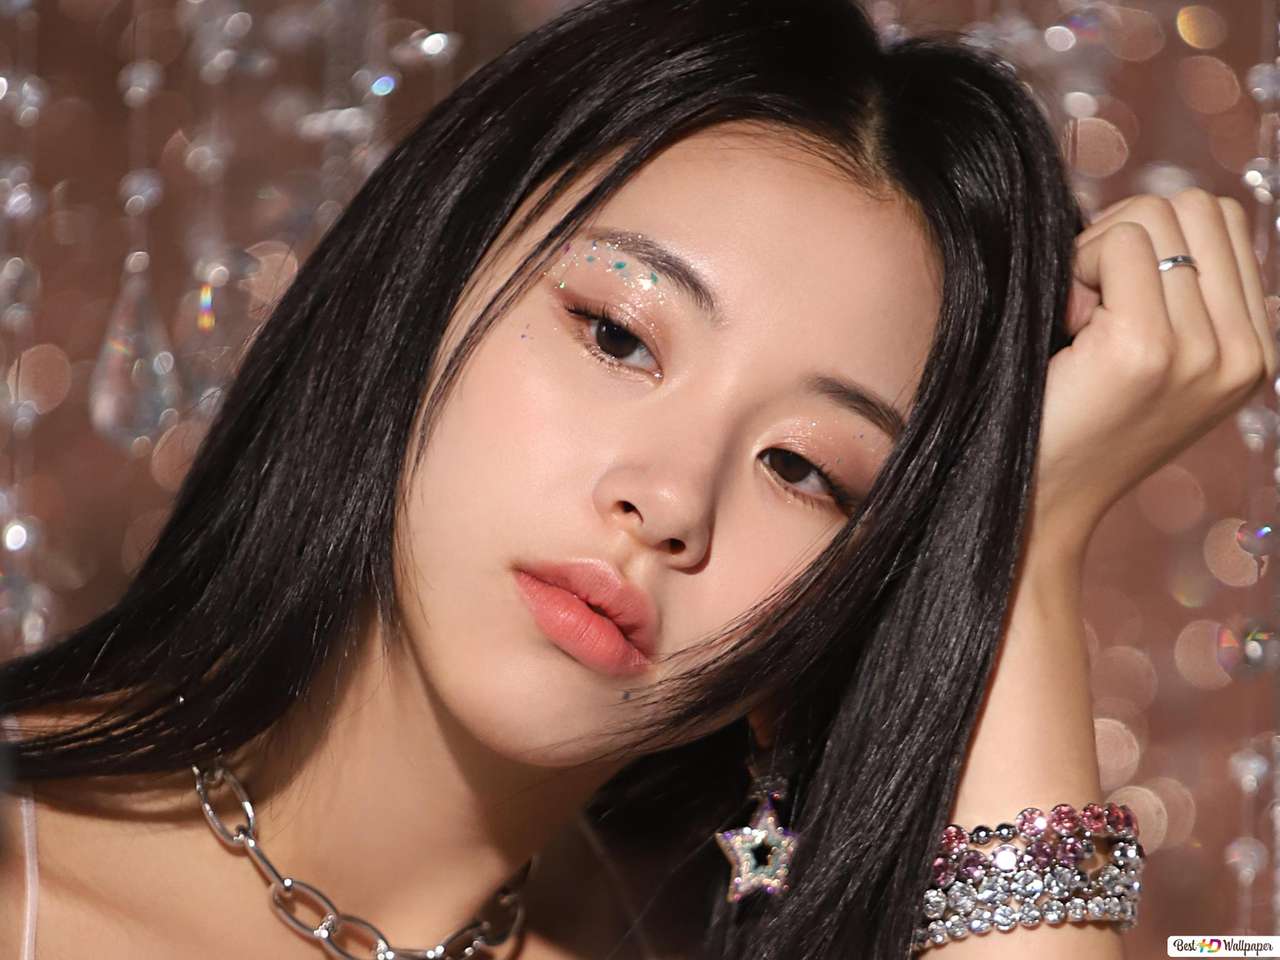 Fia chaeyoung online puzzle